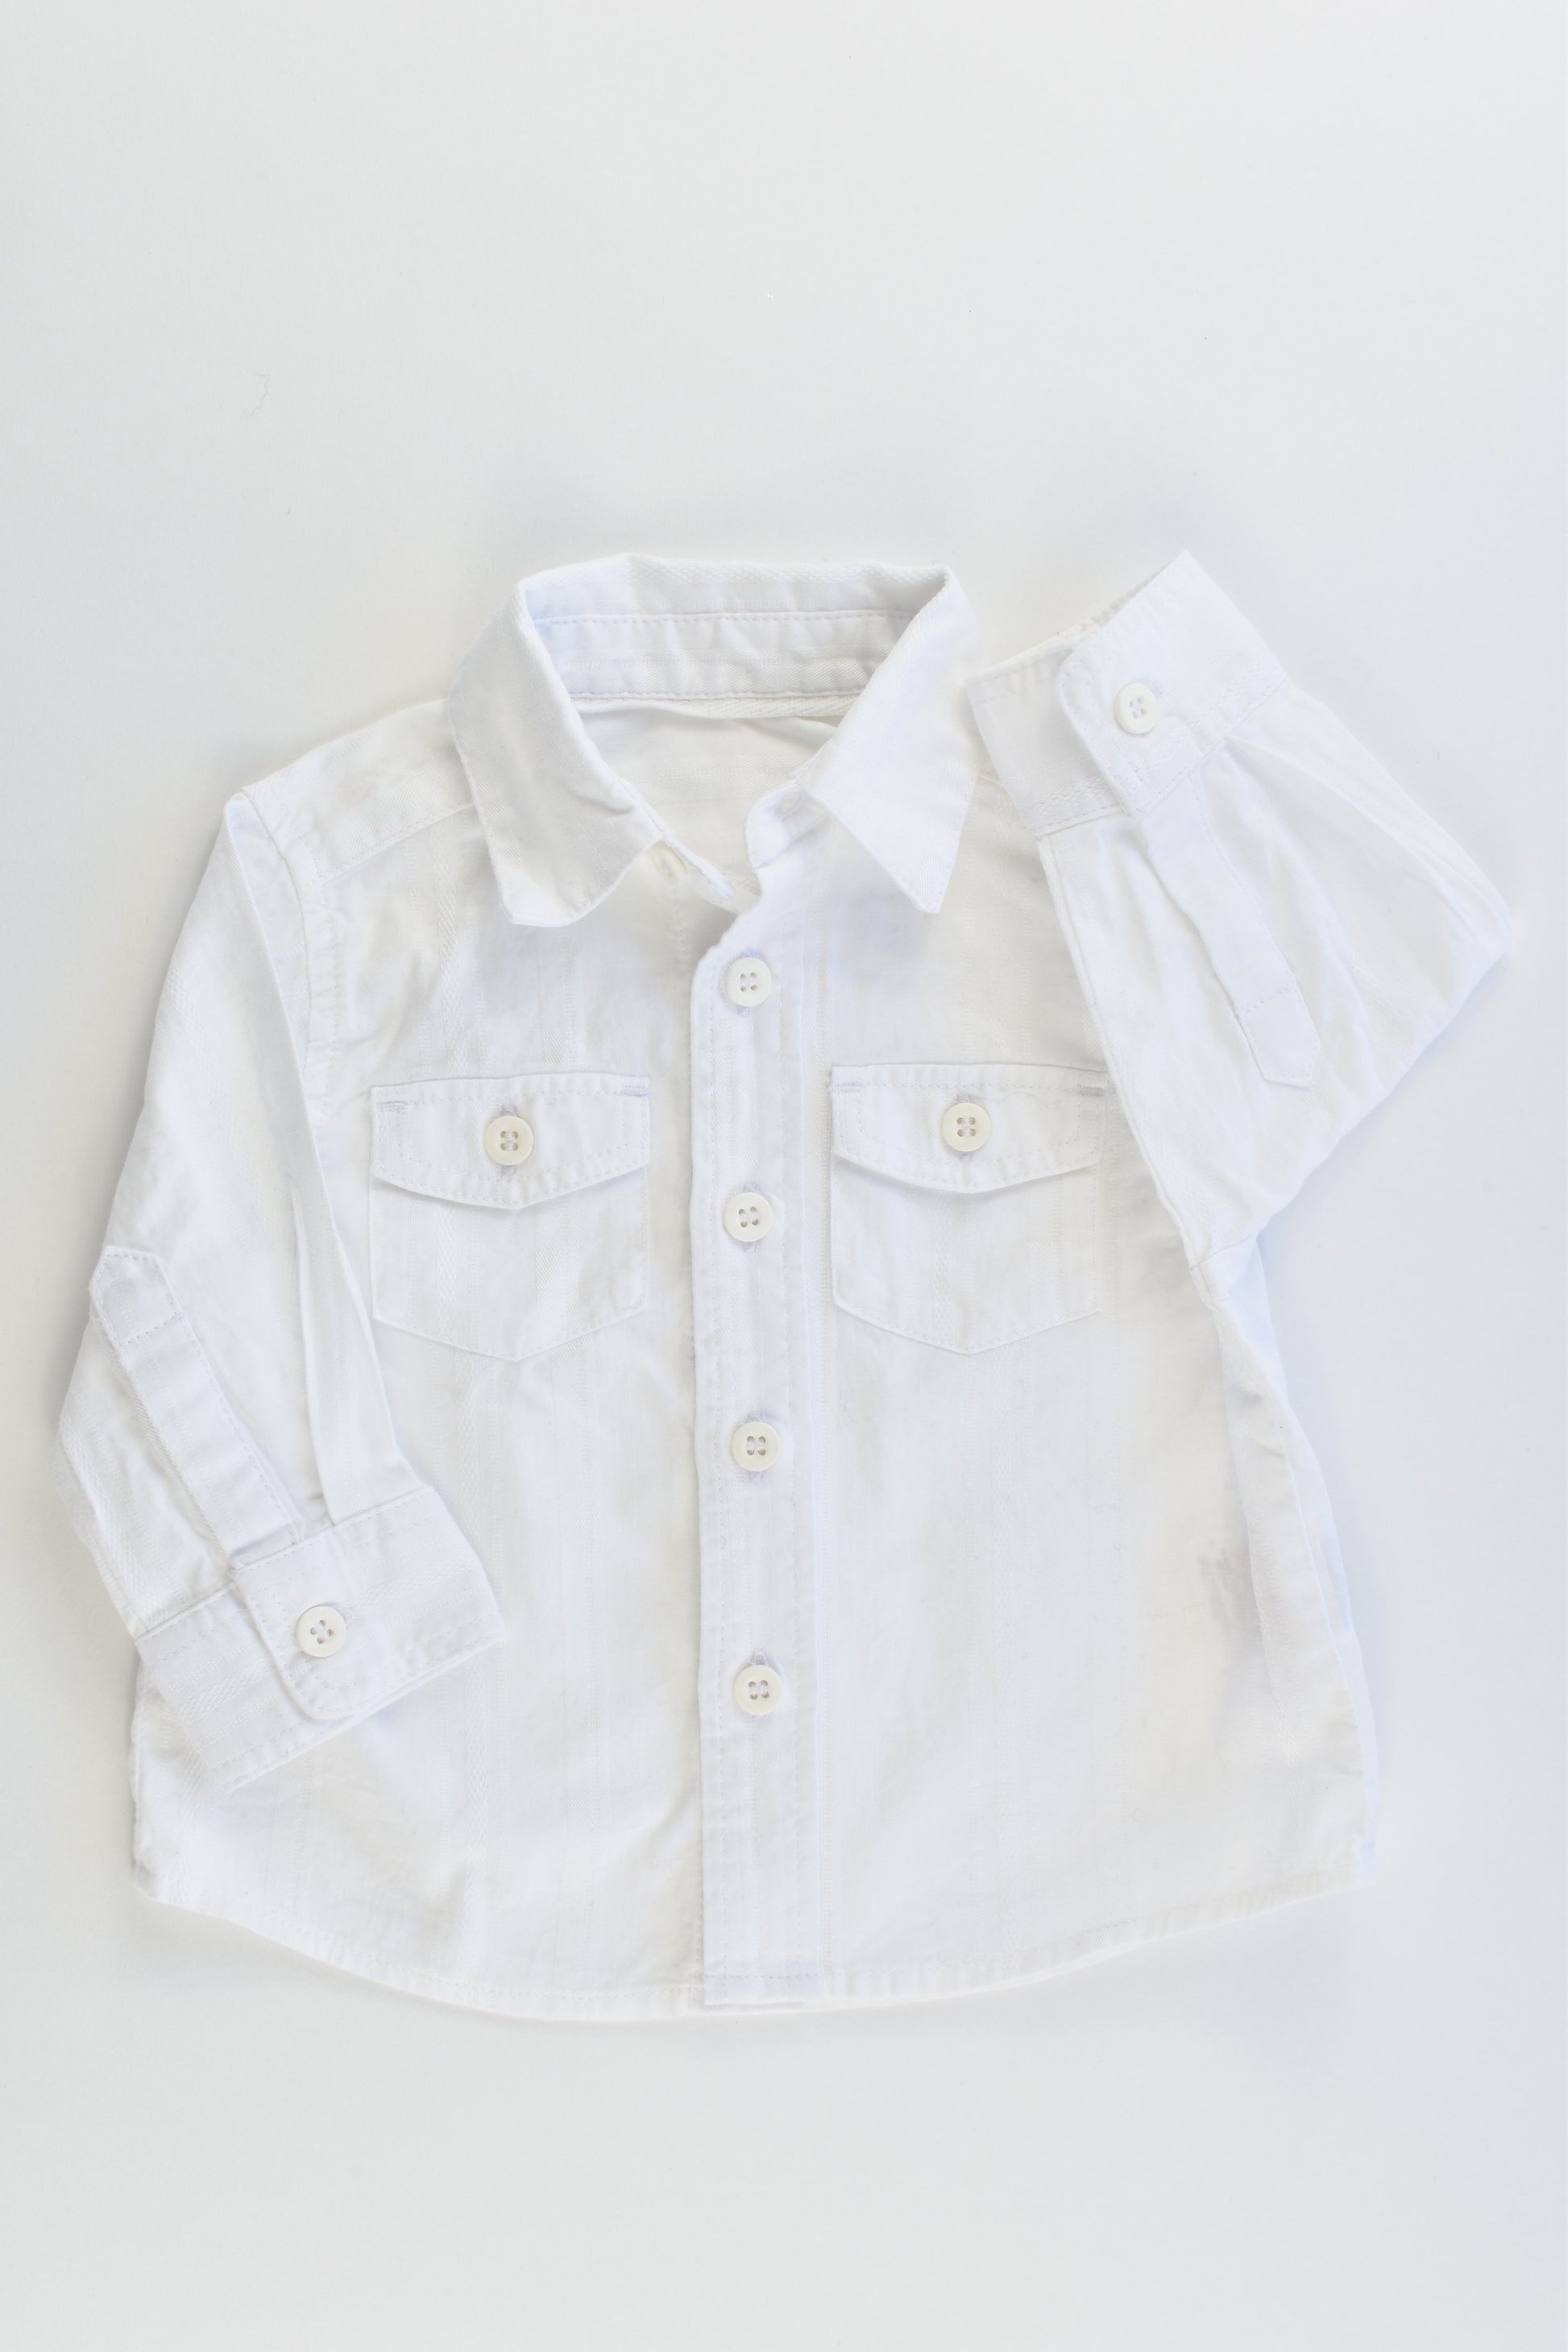 Mothercare Size 00 (3-6 months) Collared Shirt